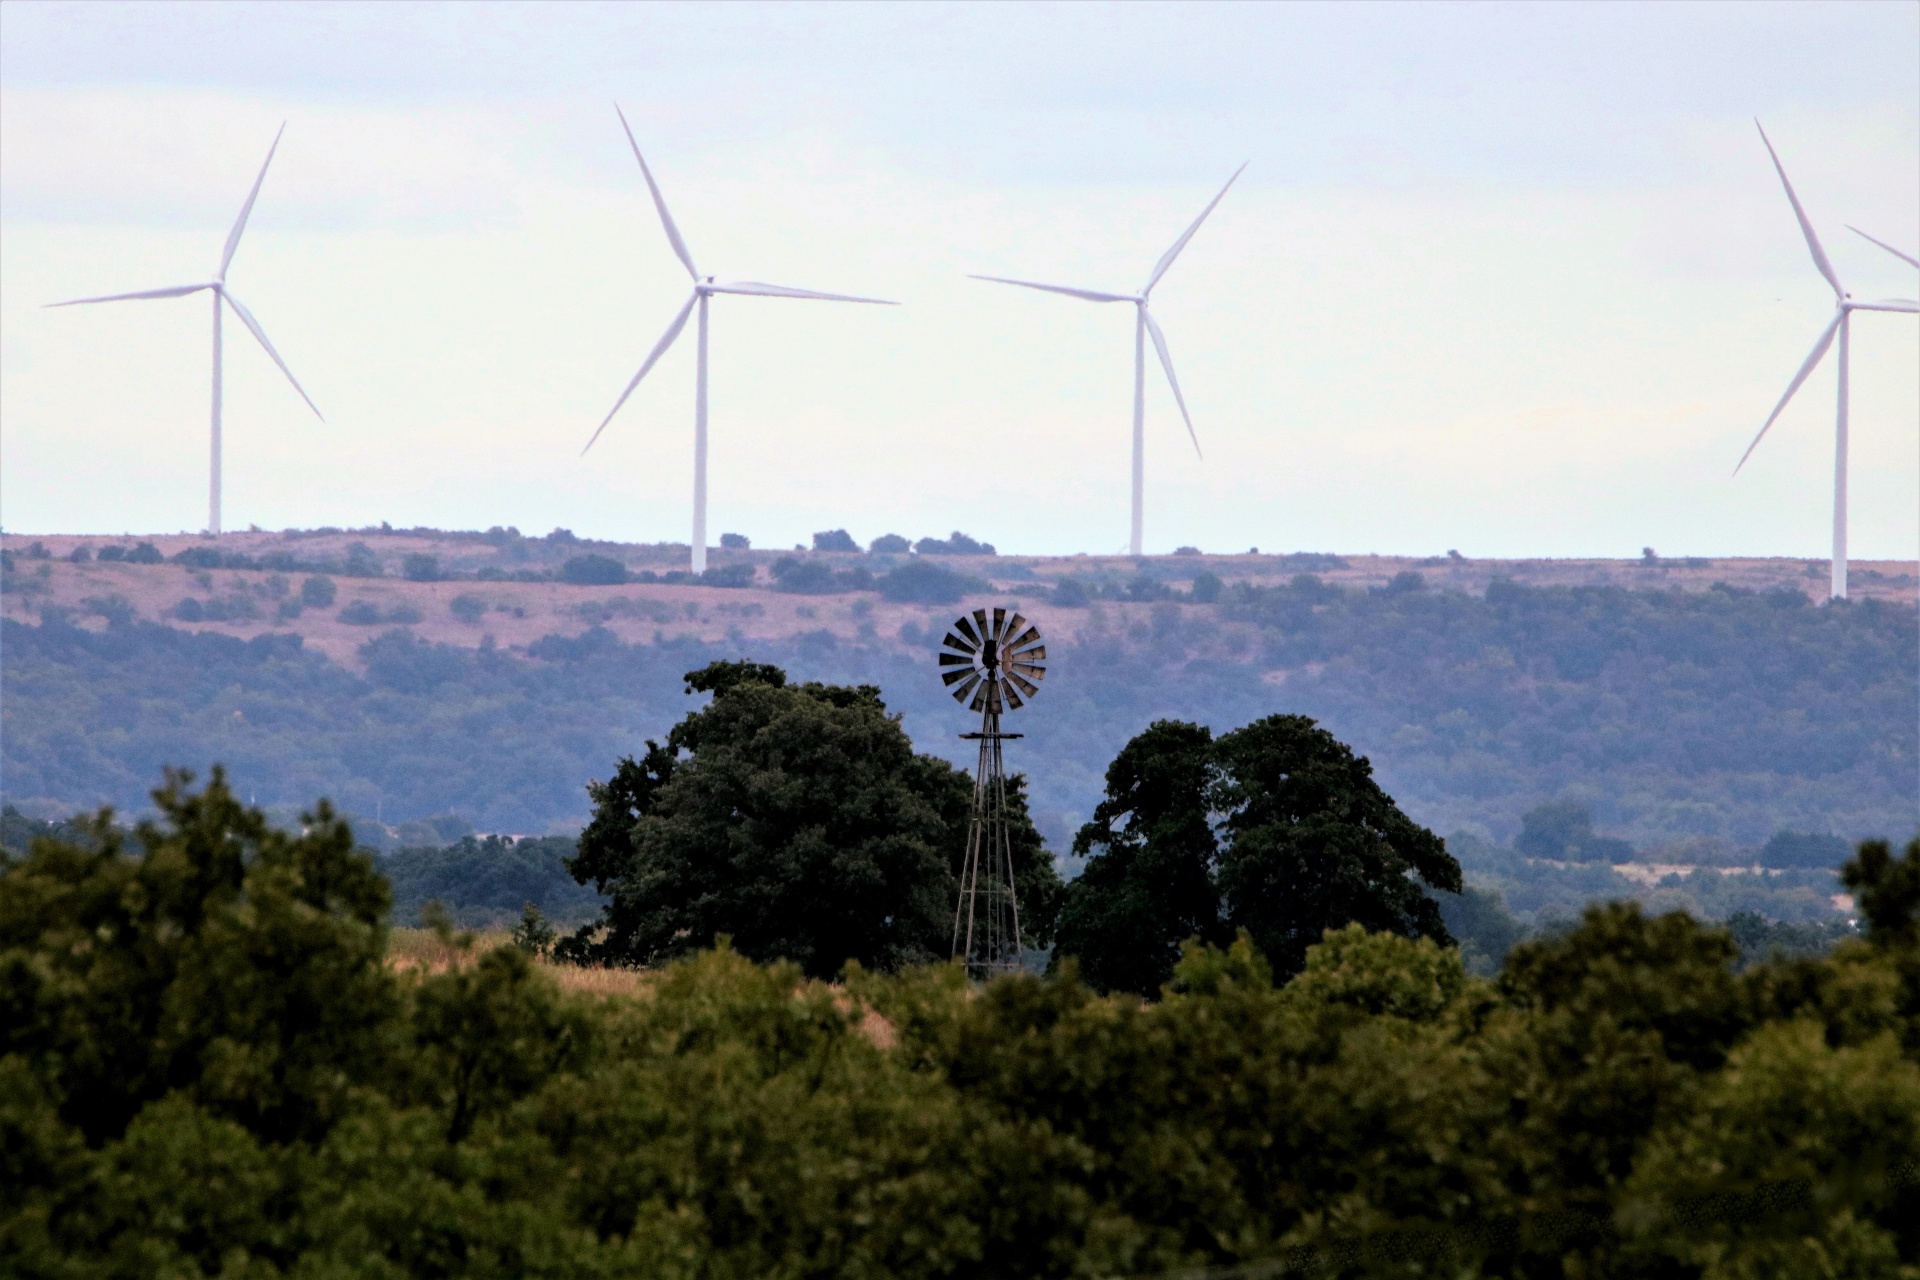 landscape shot old abandoned wind mill standing tall among green trees today's new wind turbines along ridge background windmills of yesterday and today free photo